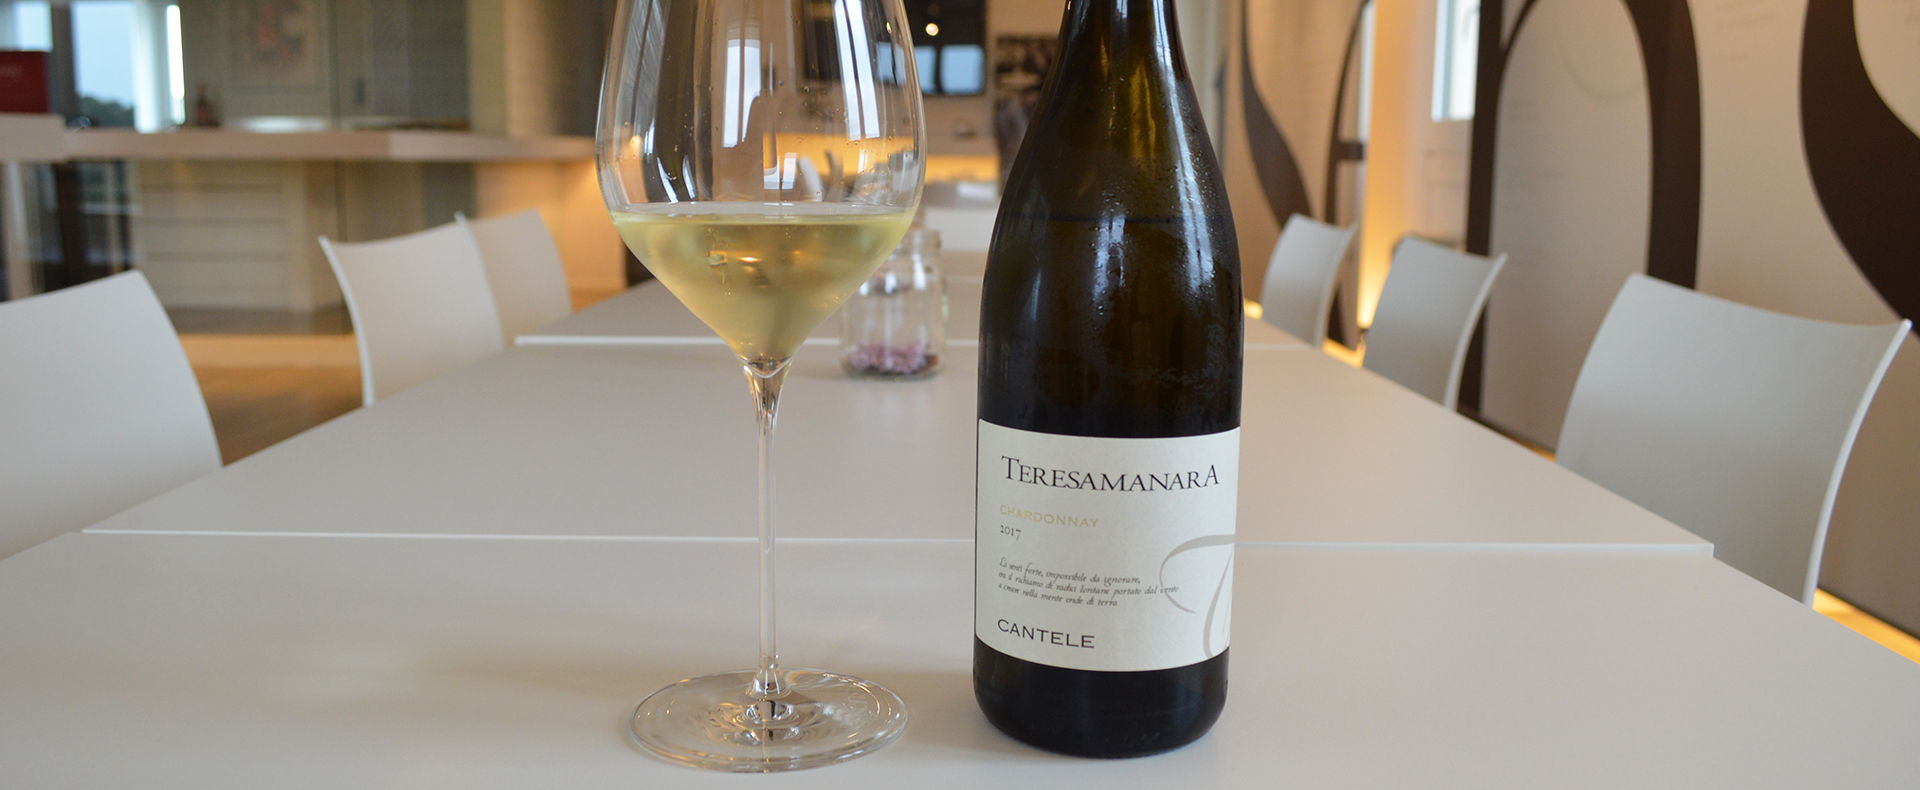 Twenty years of Teresa Manara Chardonnay, named after the woman who inspired it all…